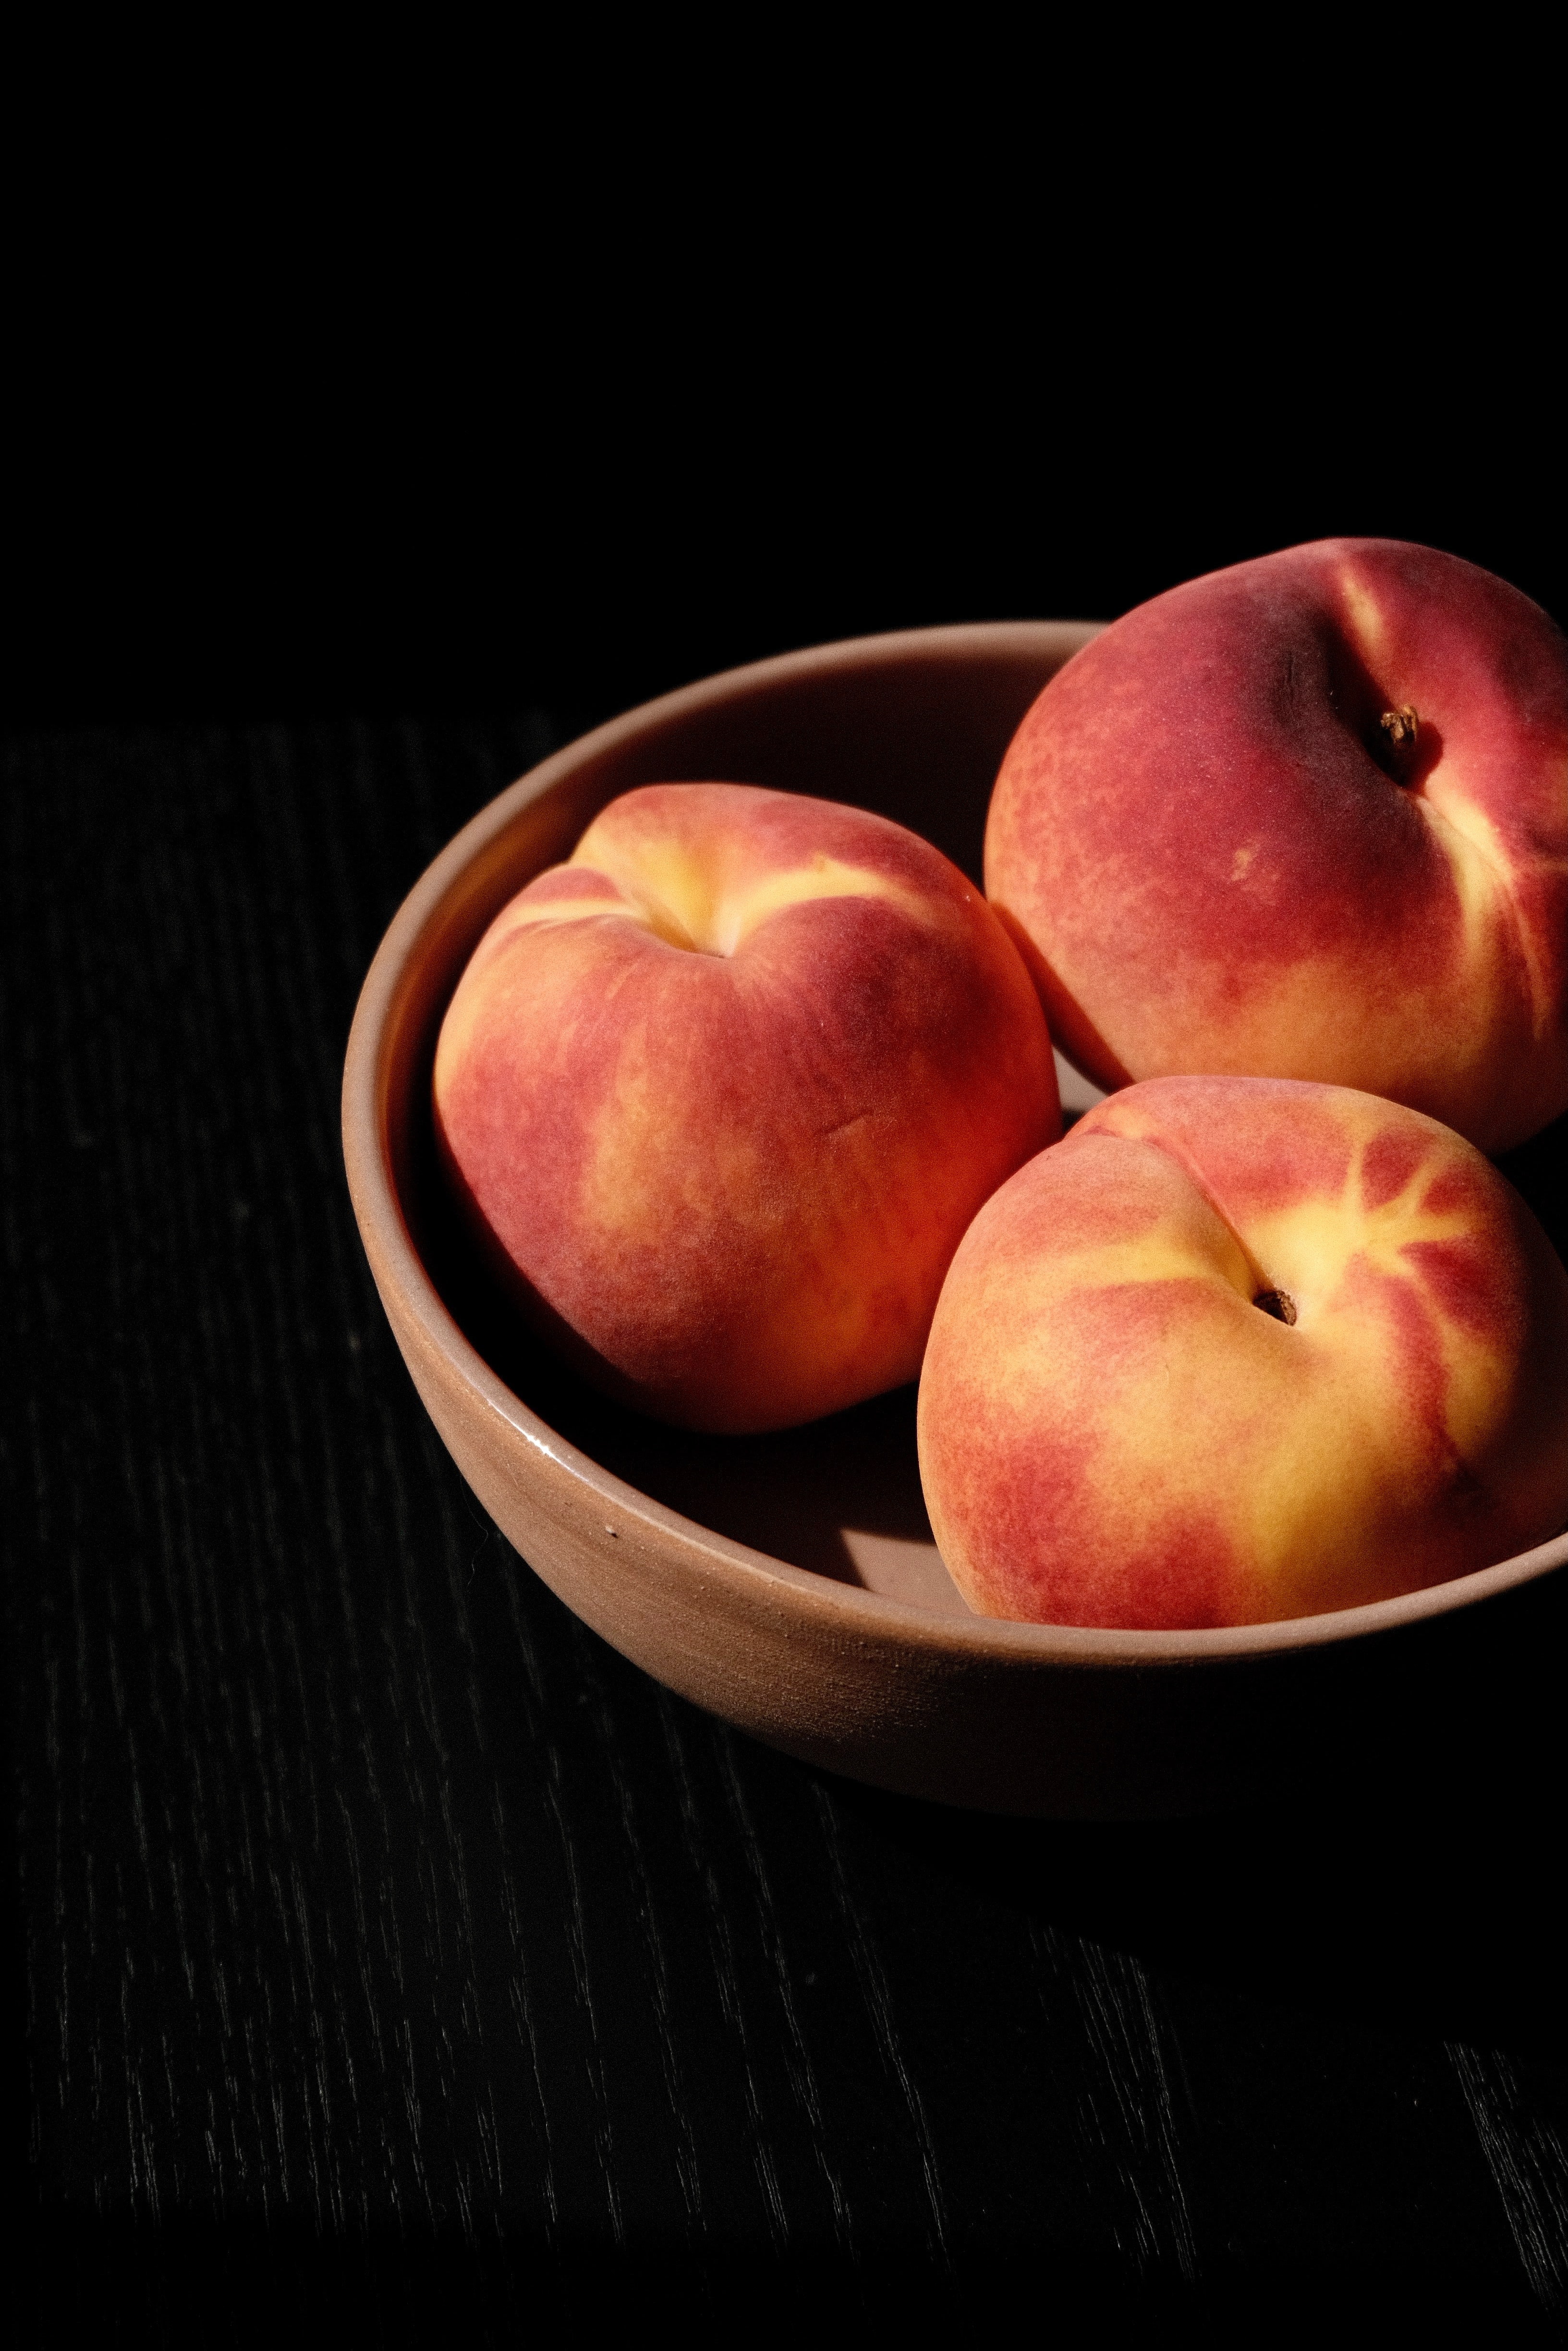 85424 download wallpaper fruits, food, peaches, table, plate screensavers and pictures for free